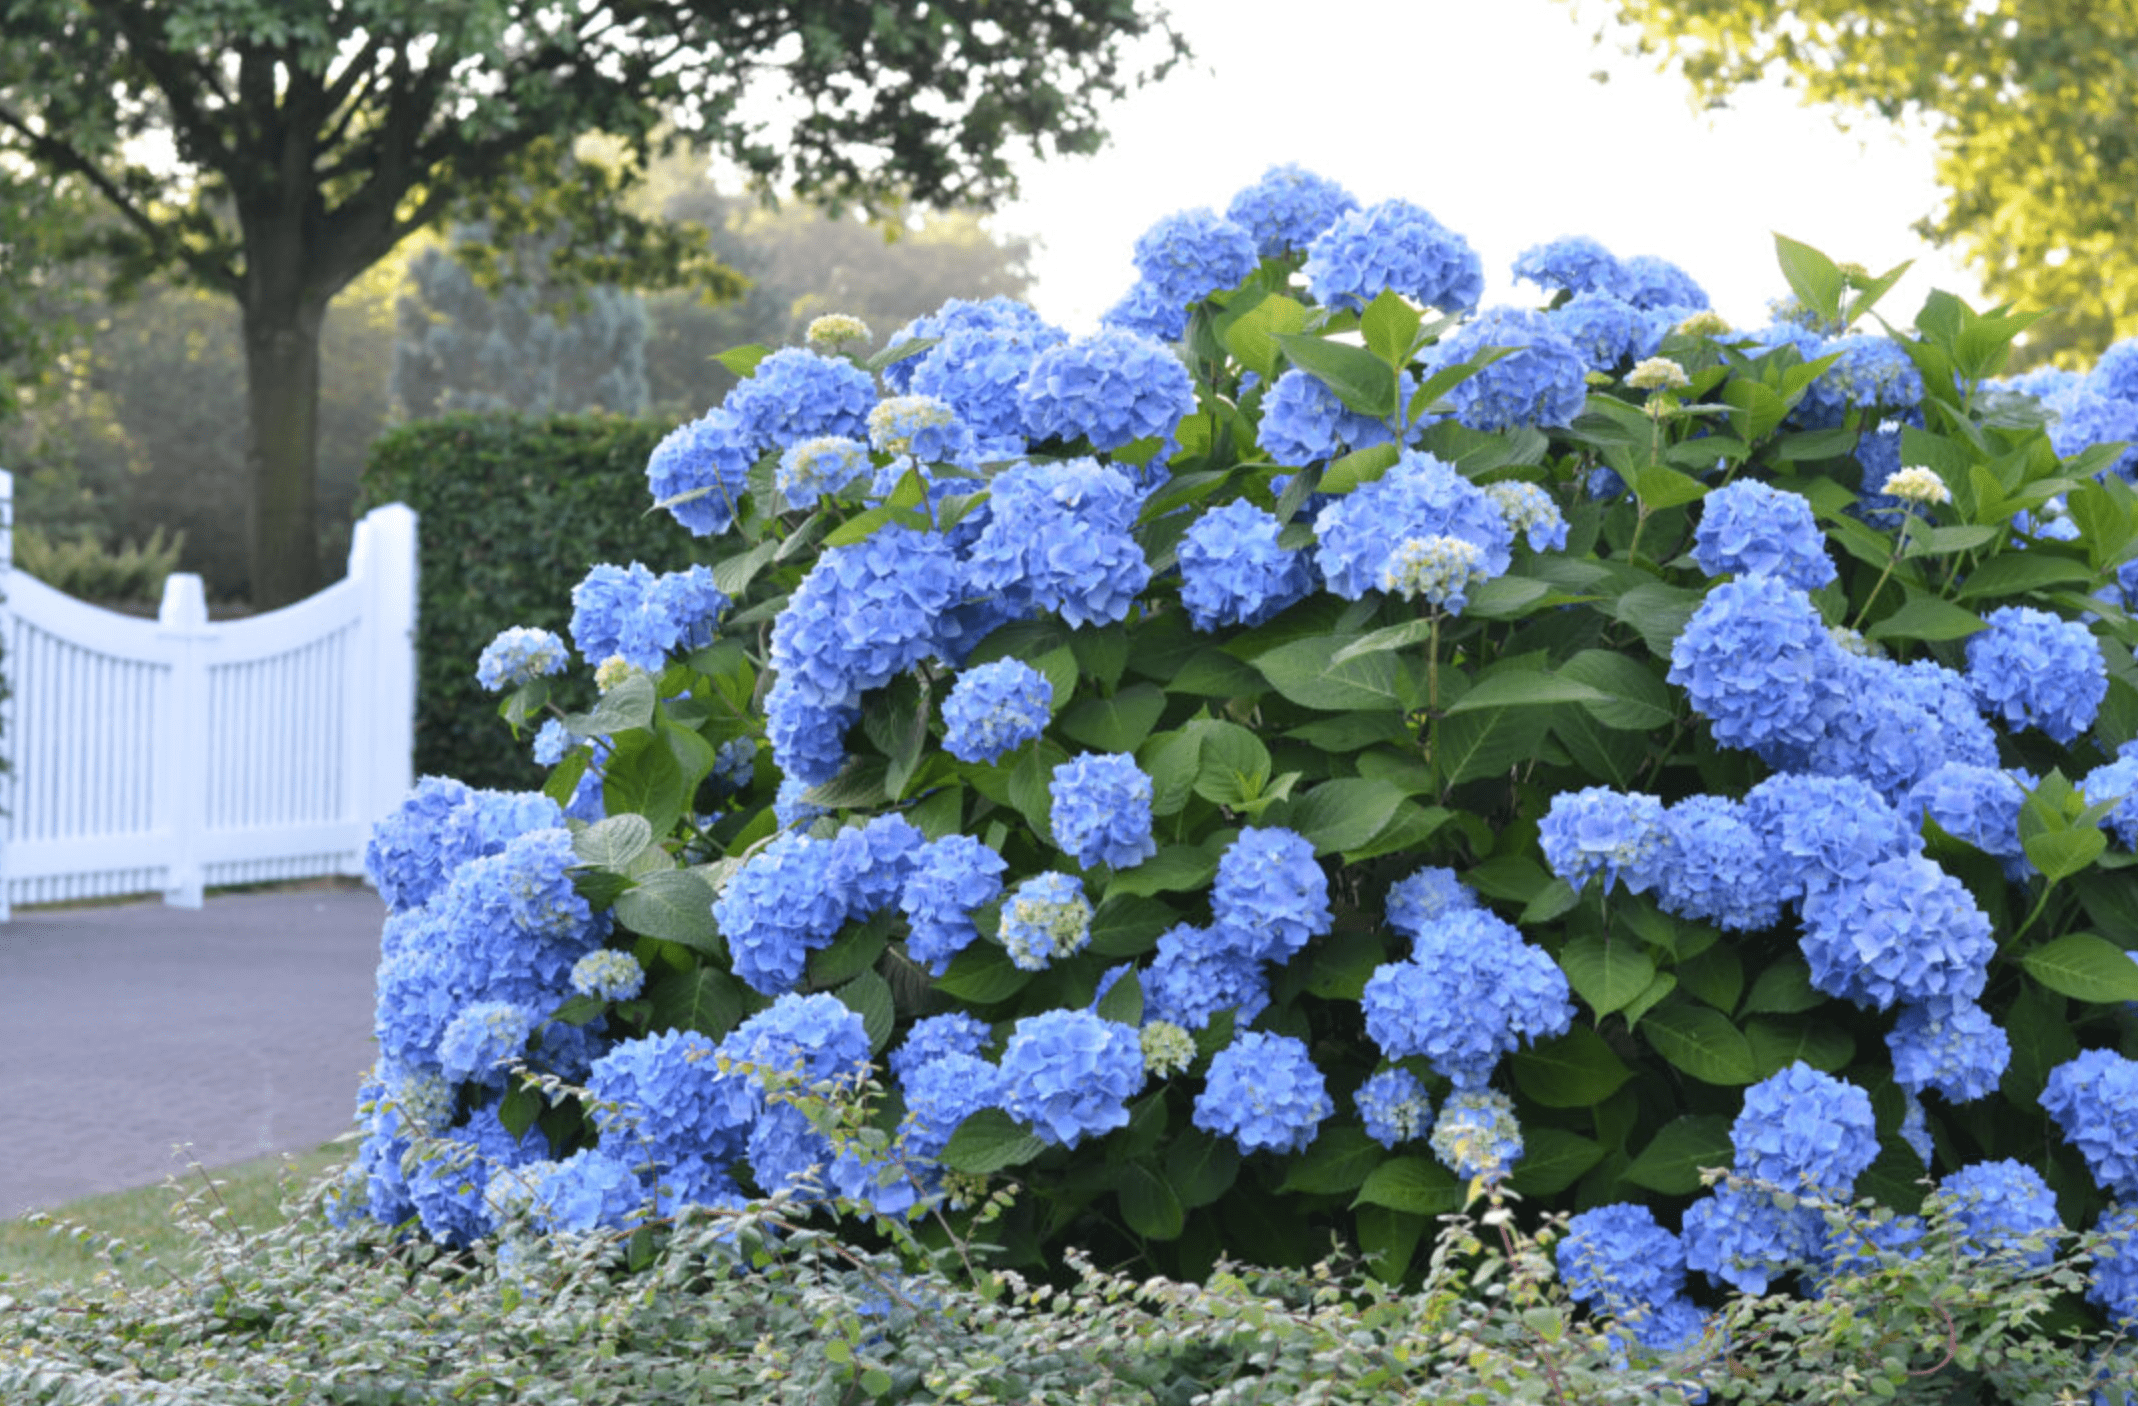 Image of Hydrangea macrophylla endless summer bush in the fall